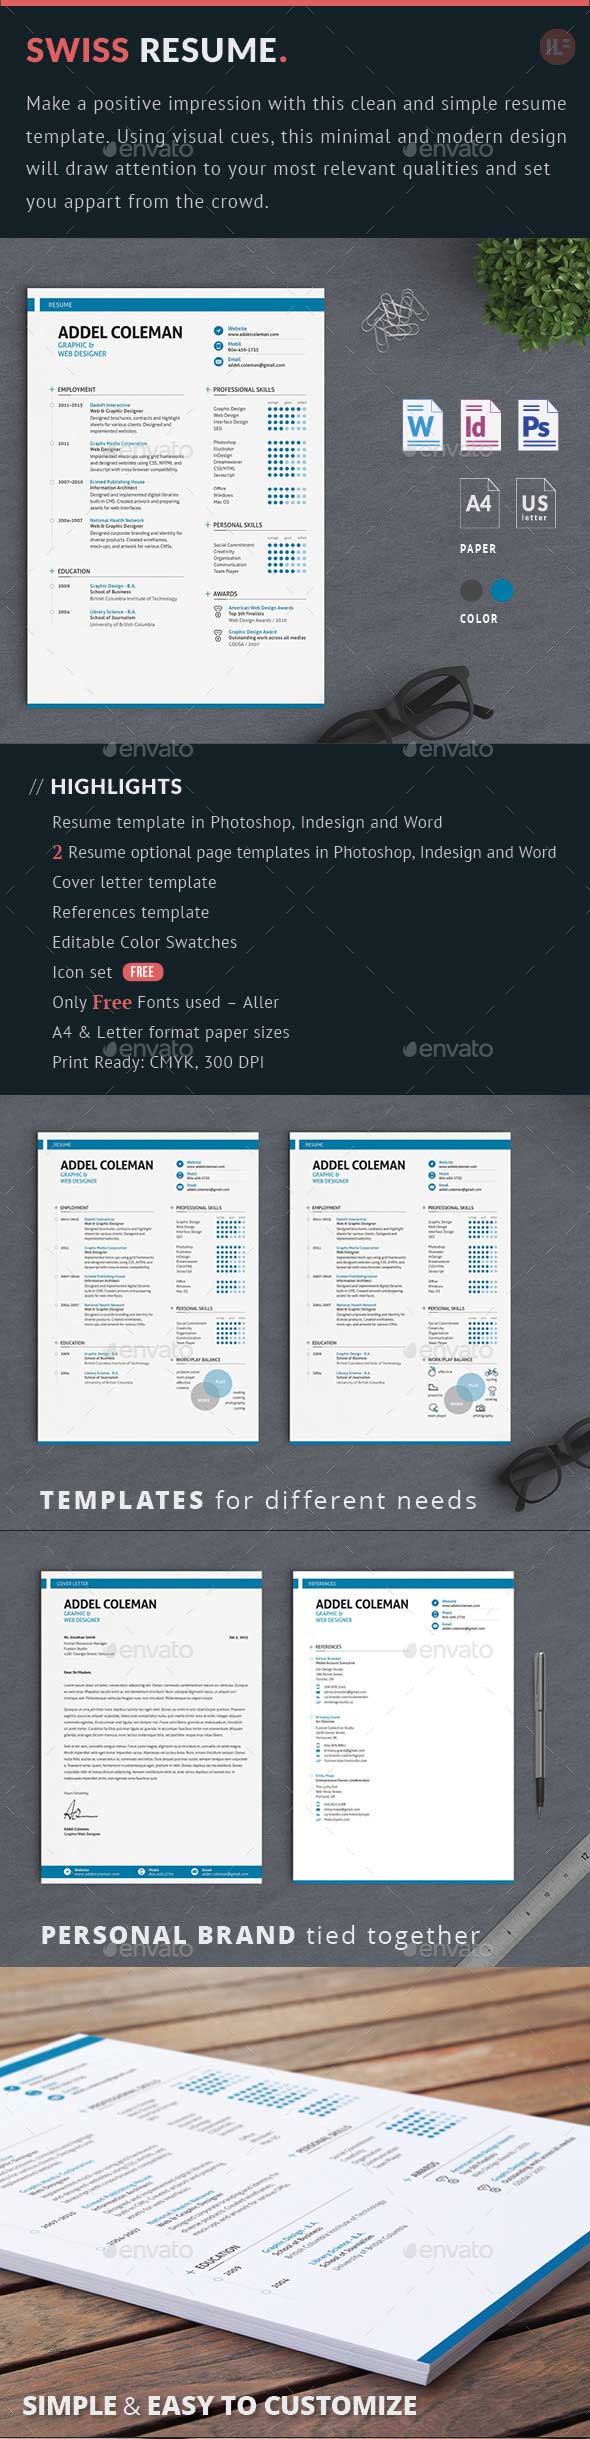 swiss-resume-template-in-psd-indesign-and-ms-word-formats-download